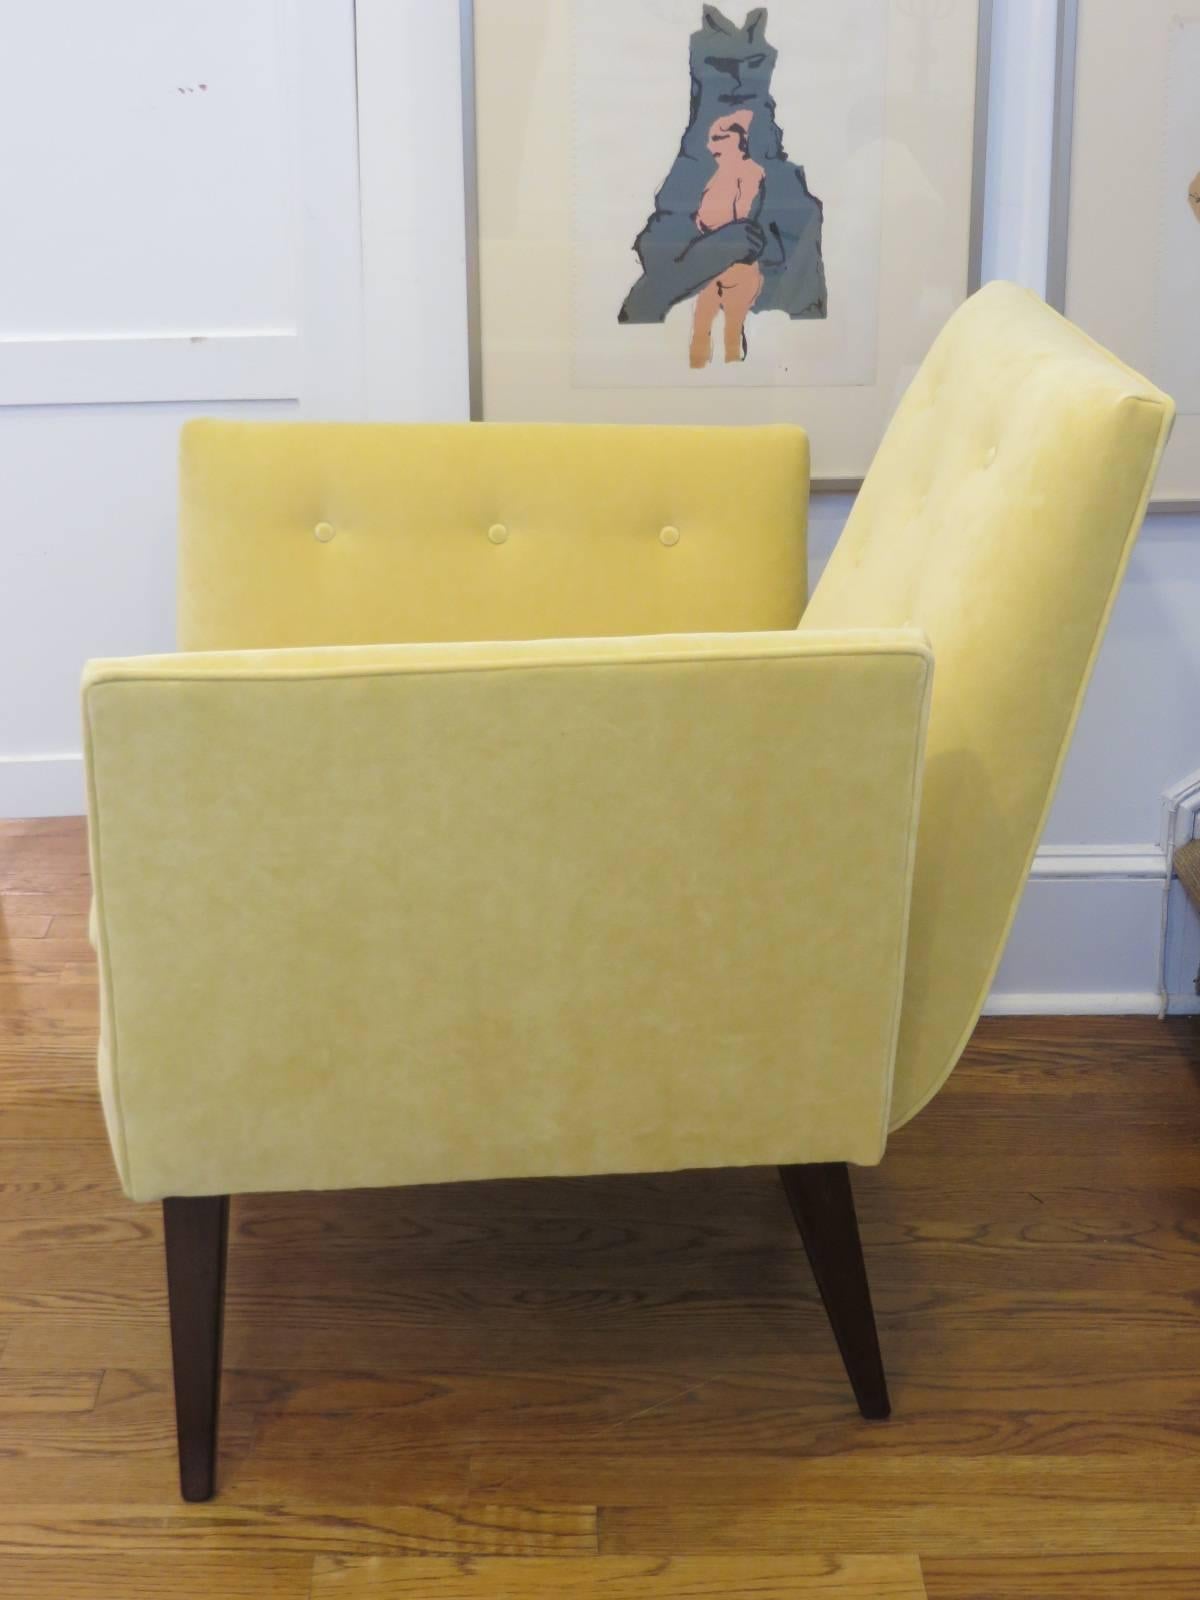 Elegant, newly upholstered and refinished velvet armchair with splayed legs. Sculptural nature of chair looks great from every angle. Chair is upholstered in soft yellow velvet which appears softer than indicated in photo.